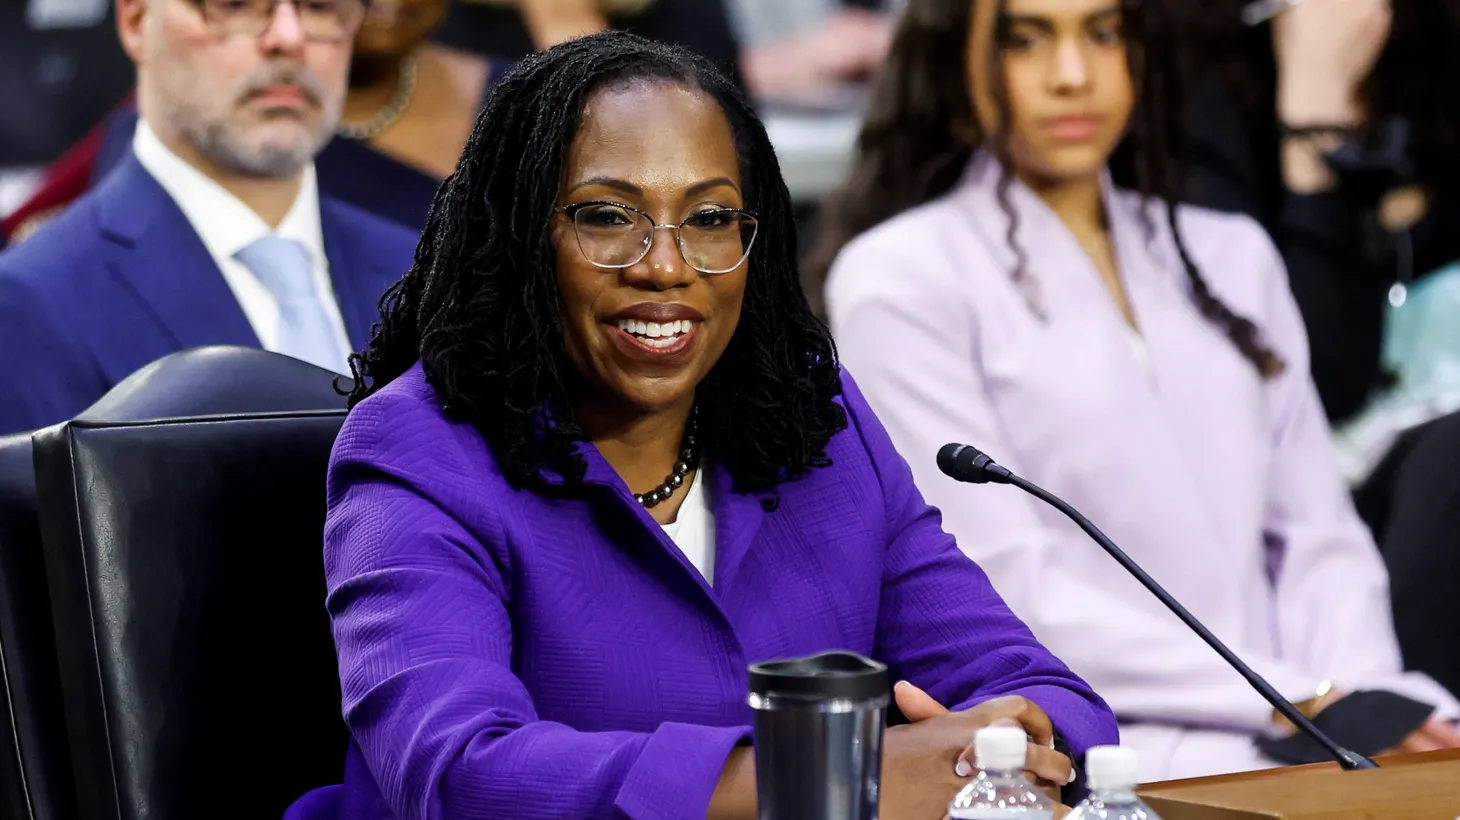 Judge Ketanji Brown Jackson smiles during her U.S. Senate Judiciary Committee confirmation hearing on her nomination to the U.S. Supreme Court, as her husband Patrick Jackson and her daughter Leila are seated behind her, on Capitol Hill in Washington, U.S., March 21, 2022.